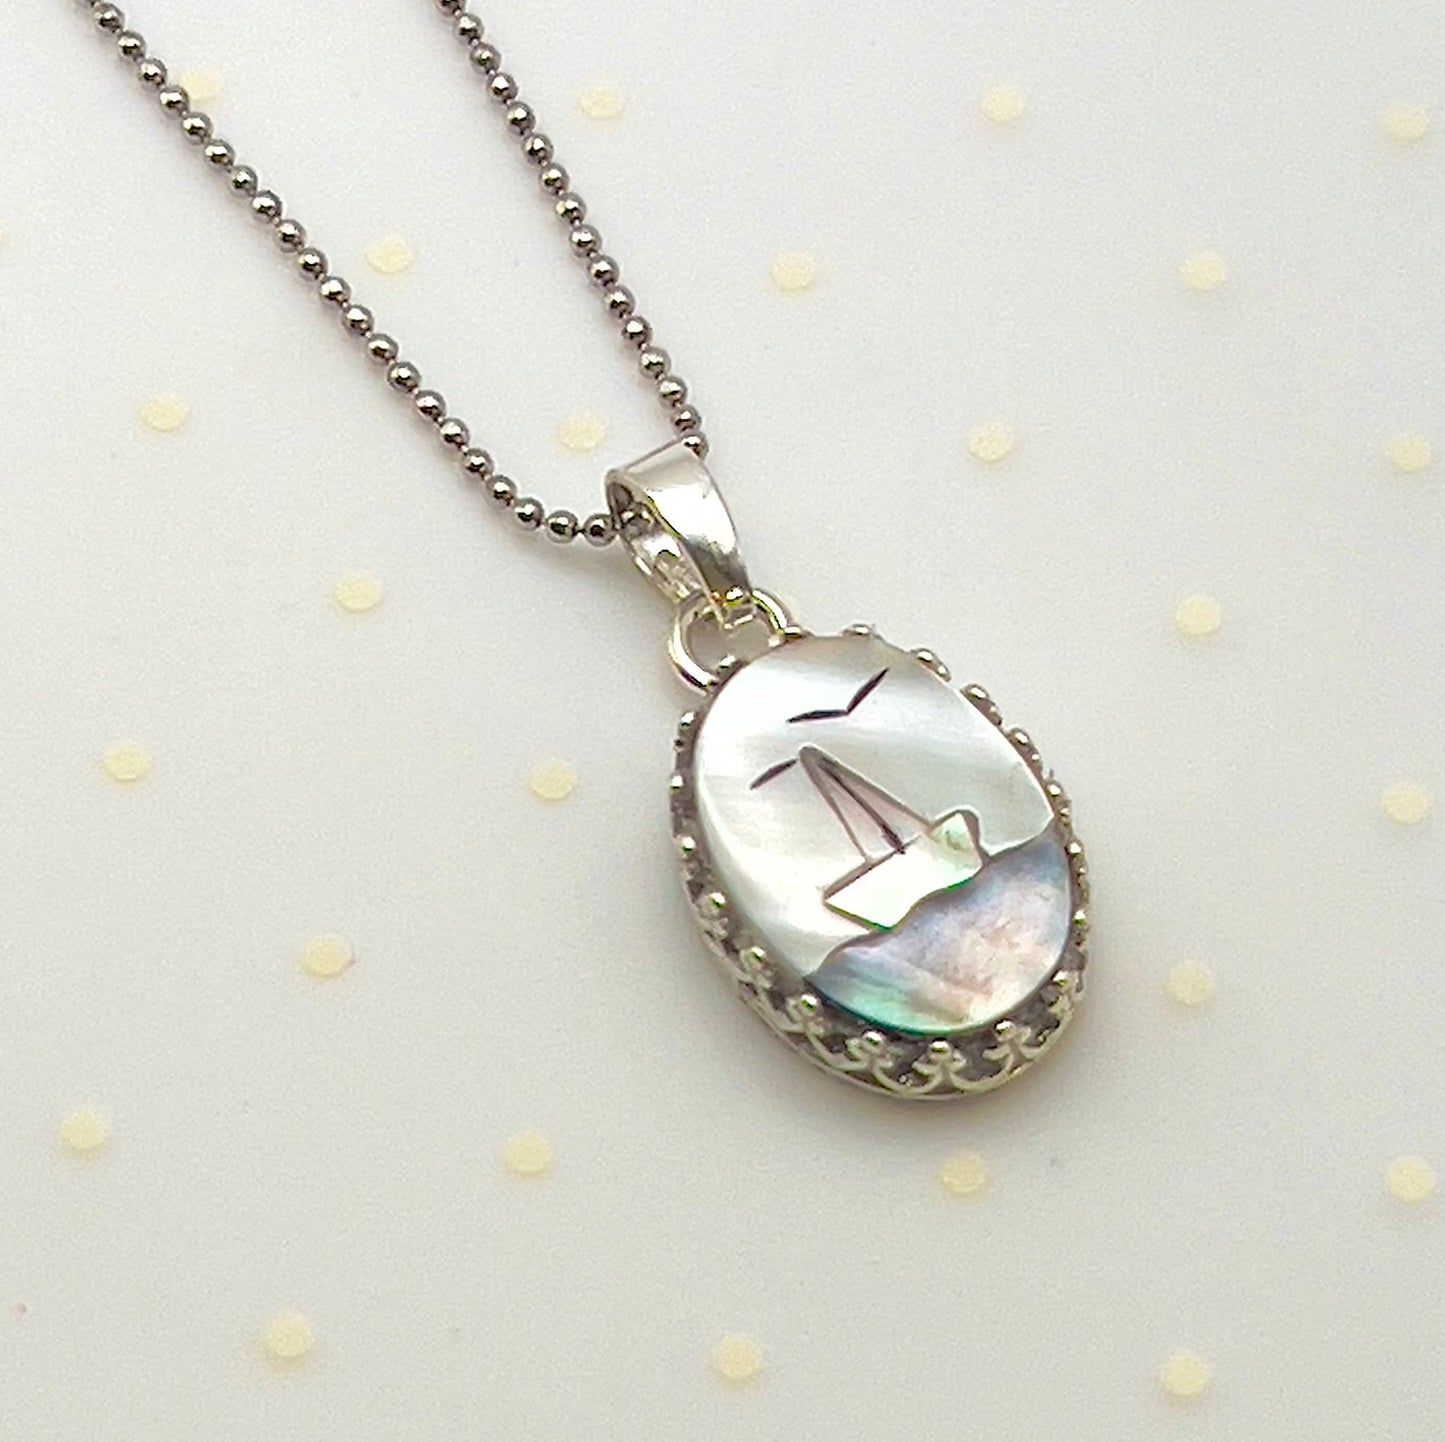 Dainty Mother of Pearl Sailboat Necklace, Beach Wedding Jewelry, Nautical